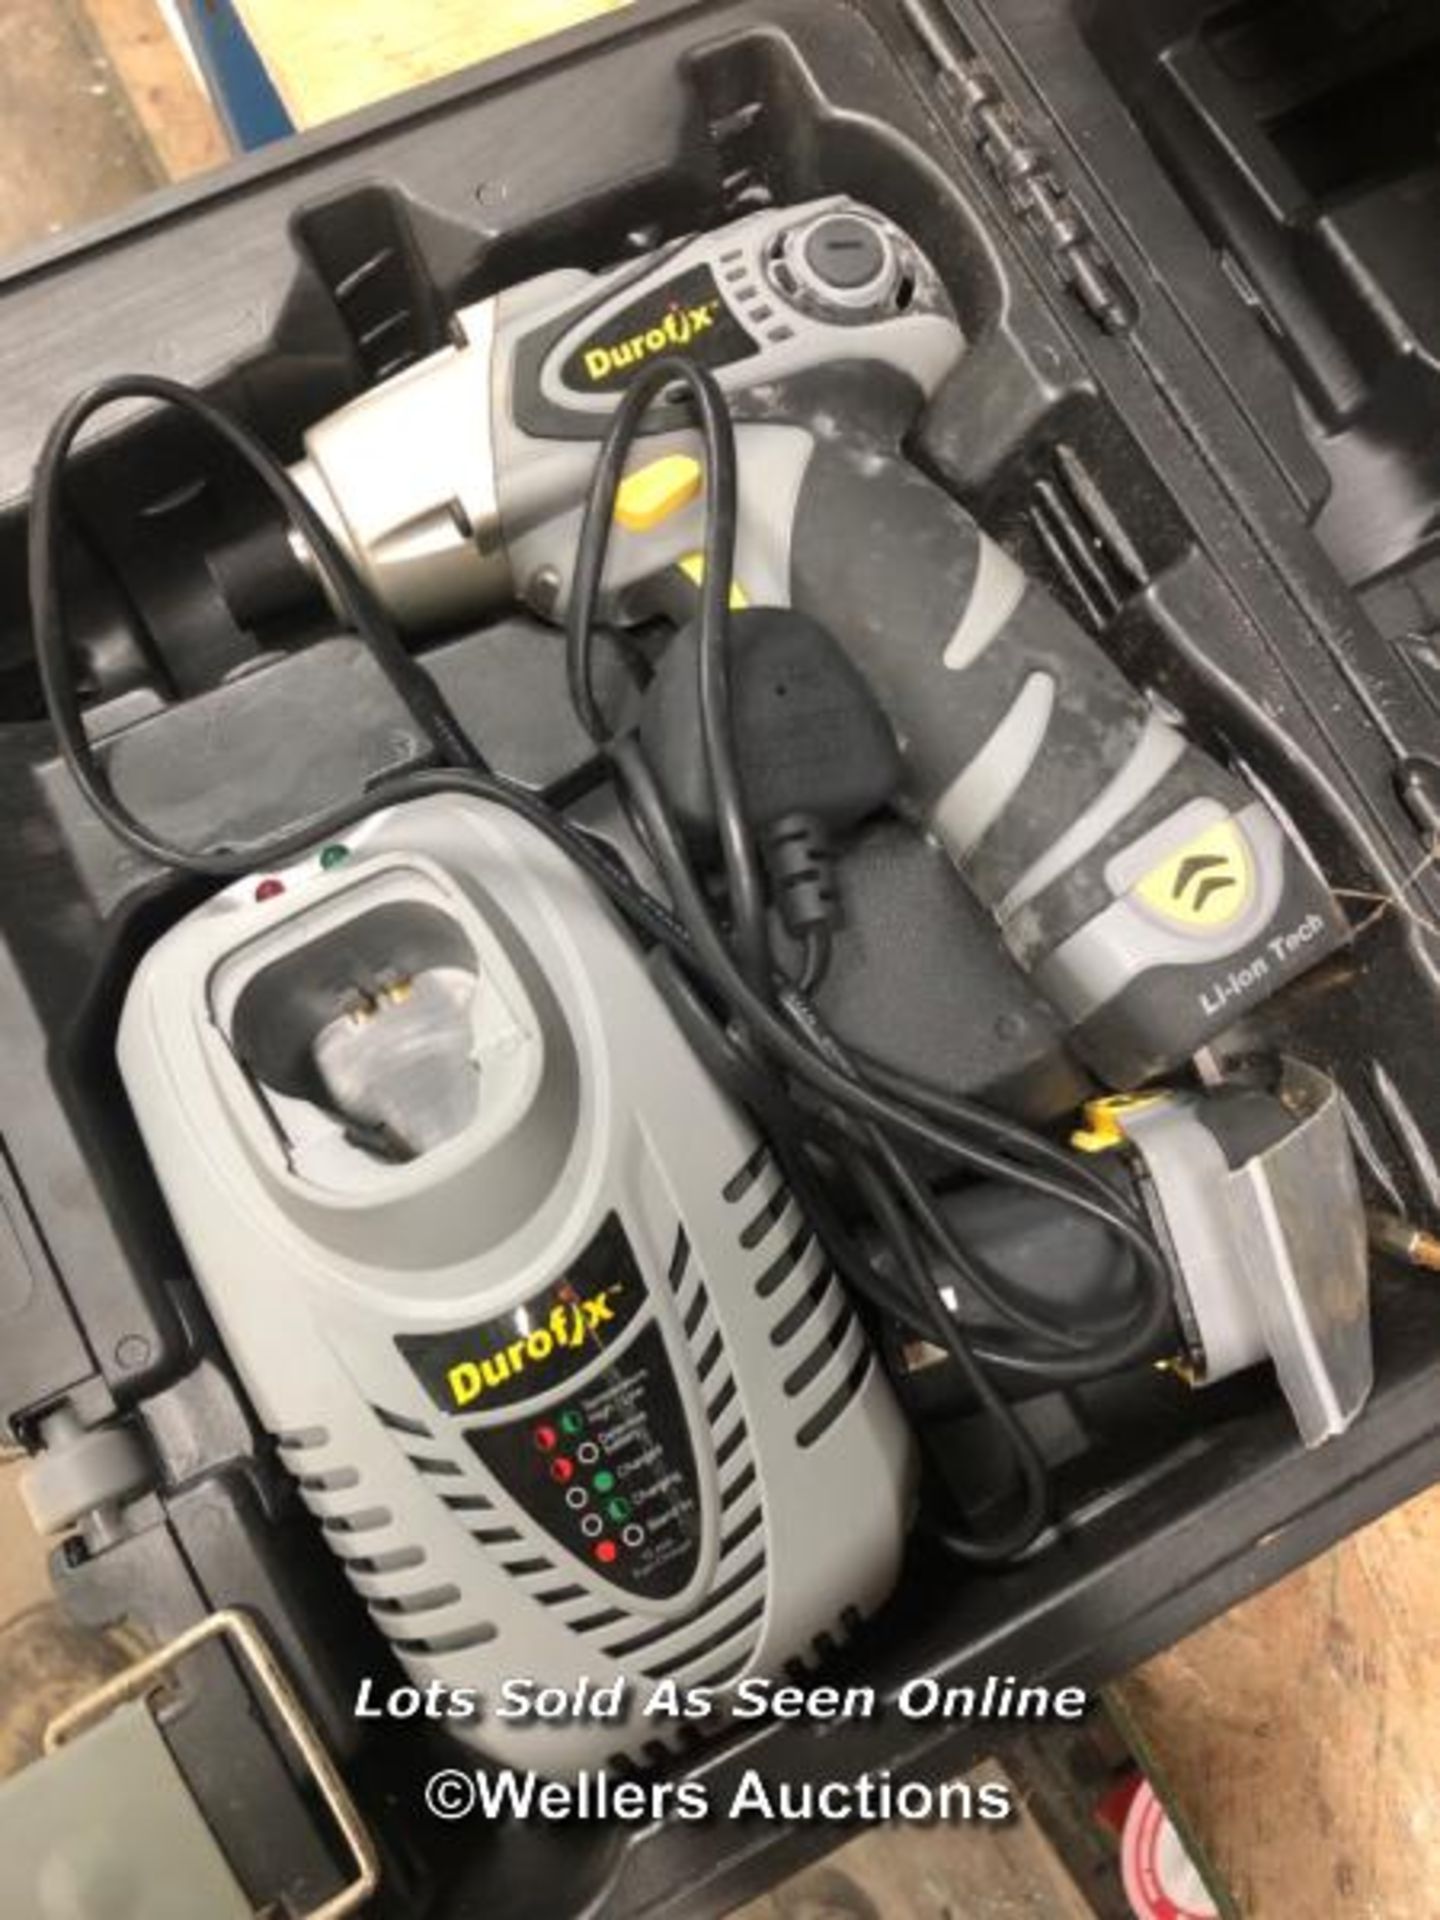 DUROFIX RI1239 CORDLESS IMPACT DRIVER WITH 2X BATTERIES AND A CHARGER, IN CASE - Image 2 of 2